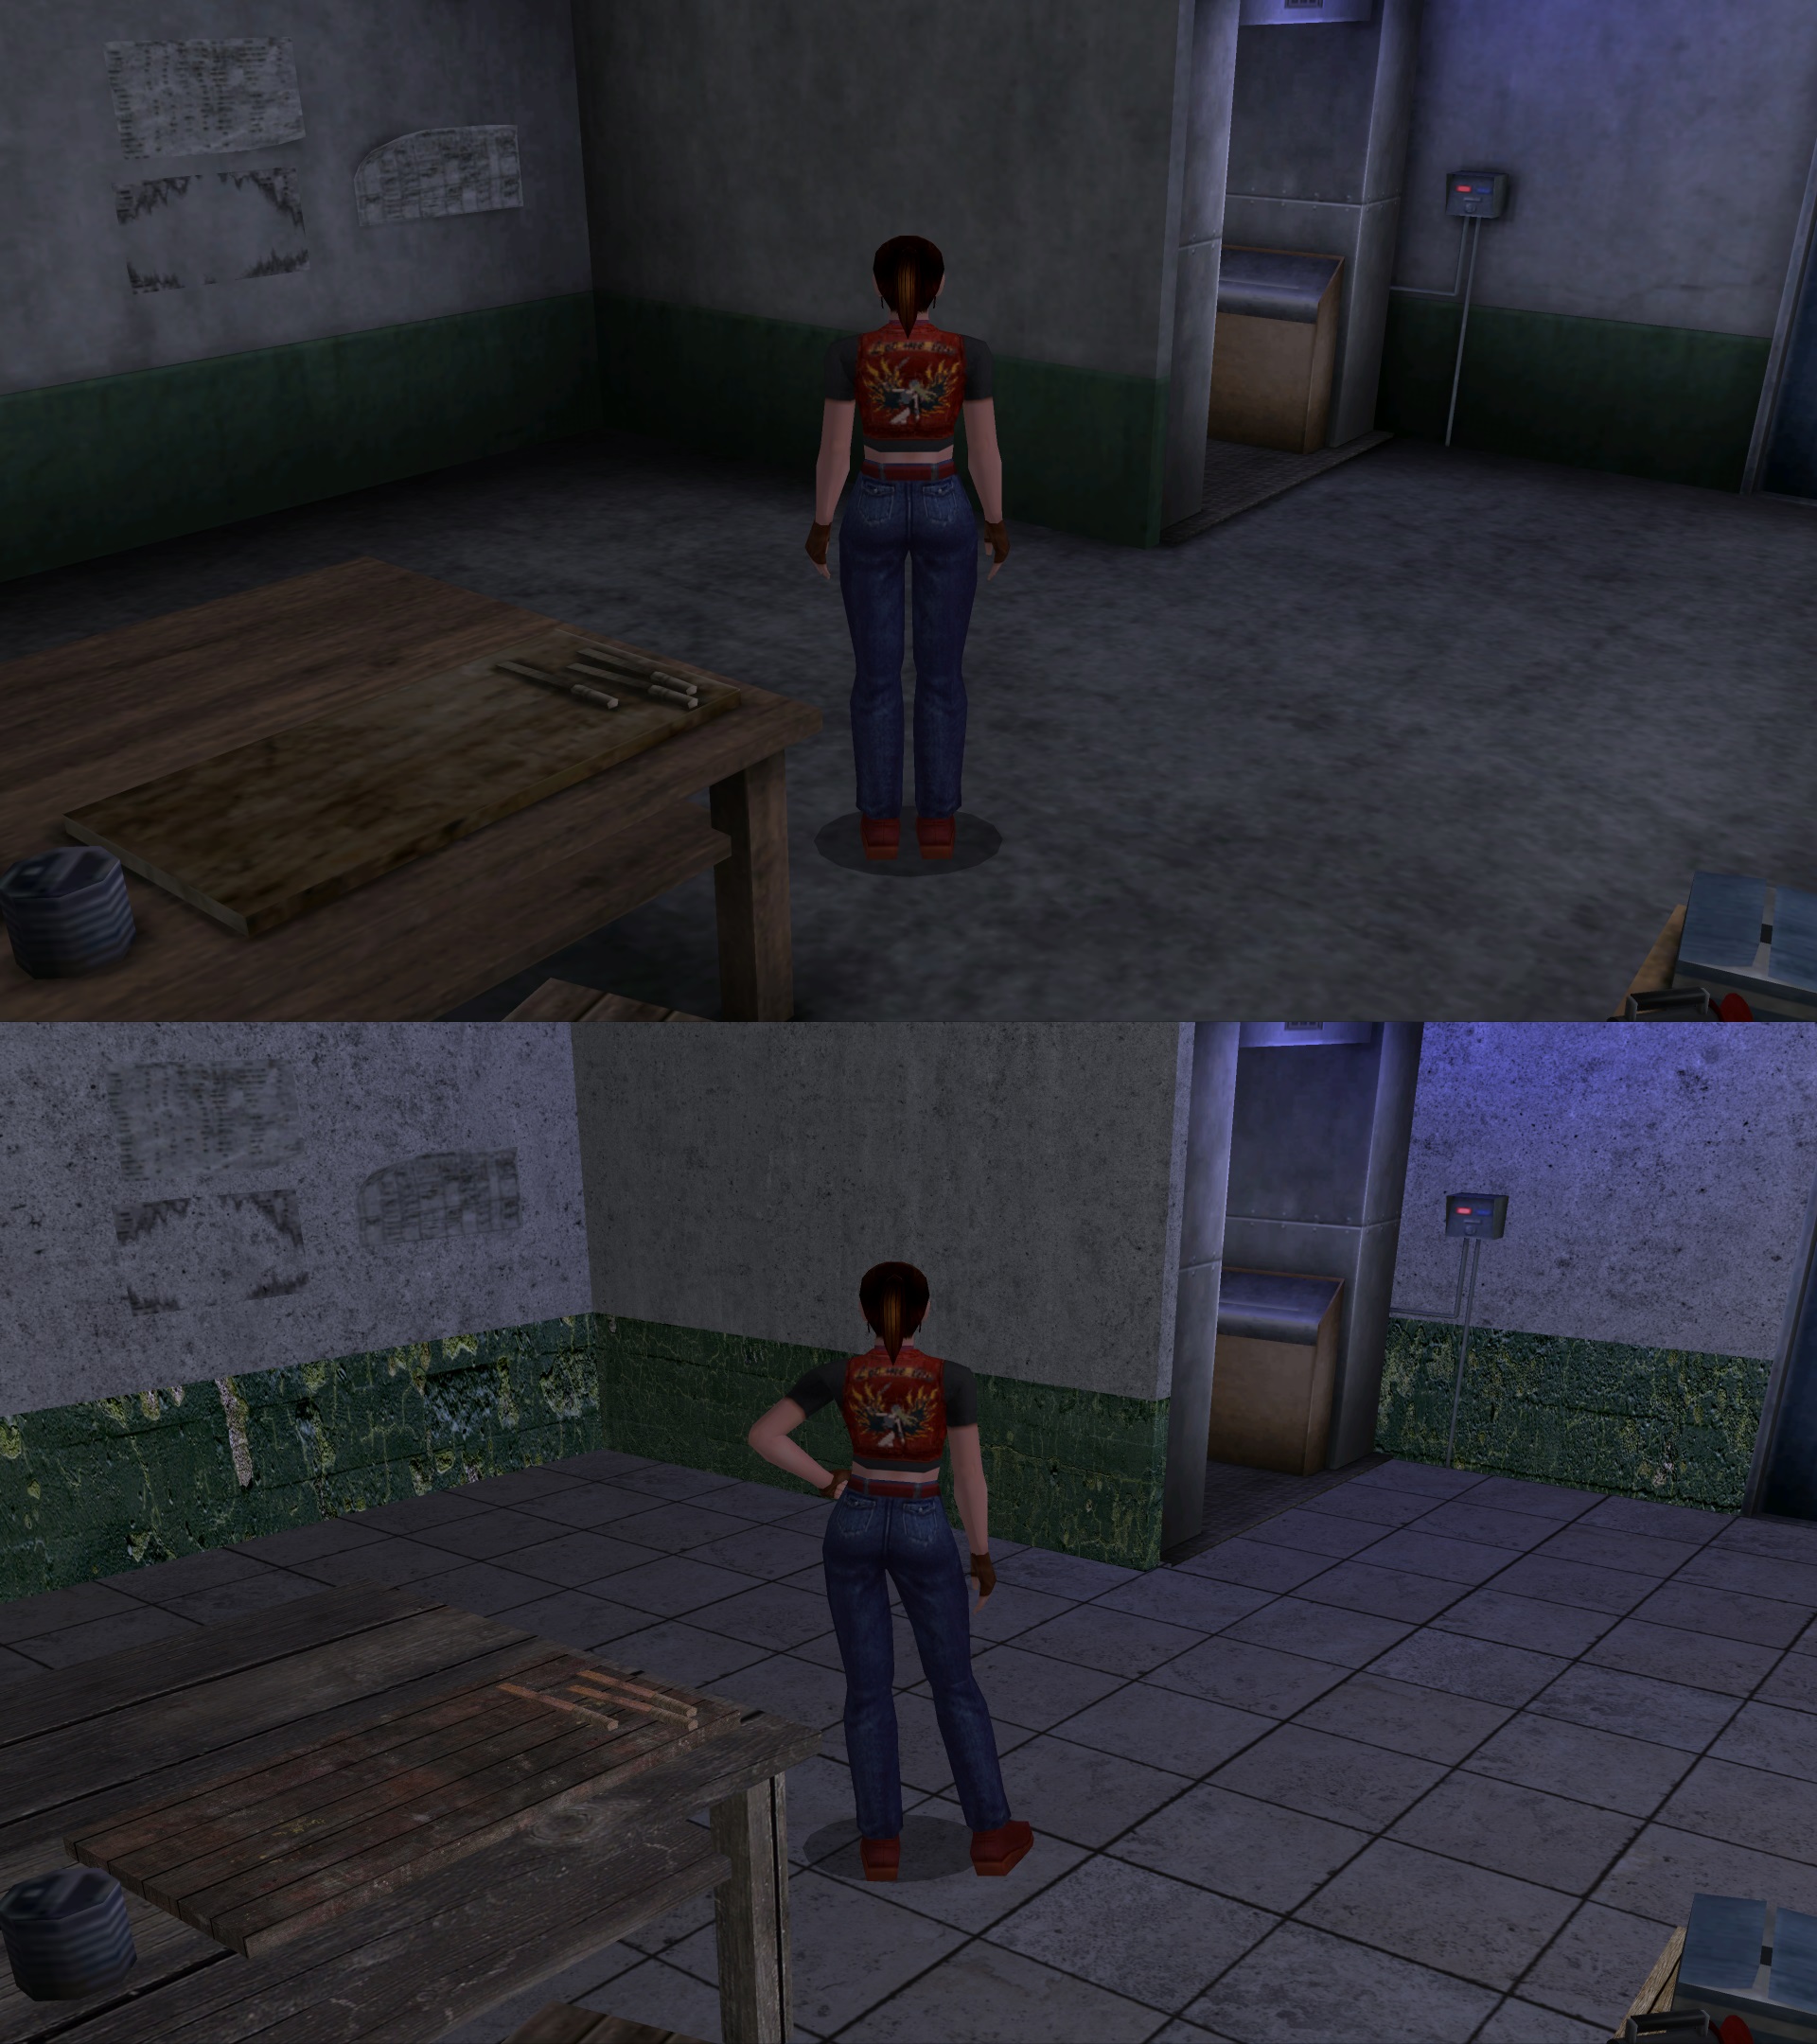 Resident Evil Code: Veronica X HD Texture Pack 1.1 by JuanchoTexHD